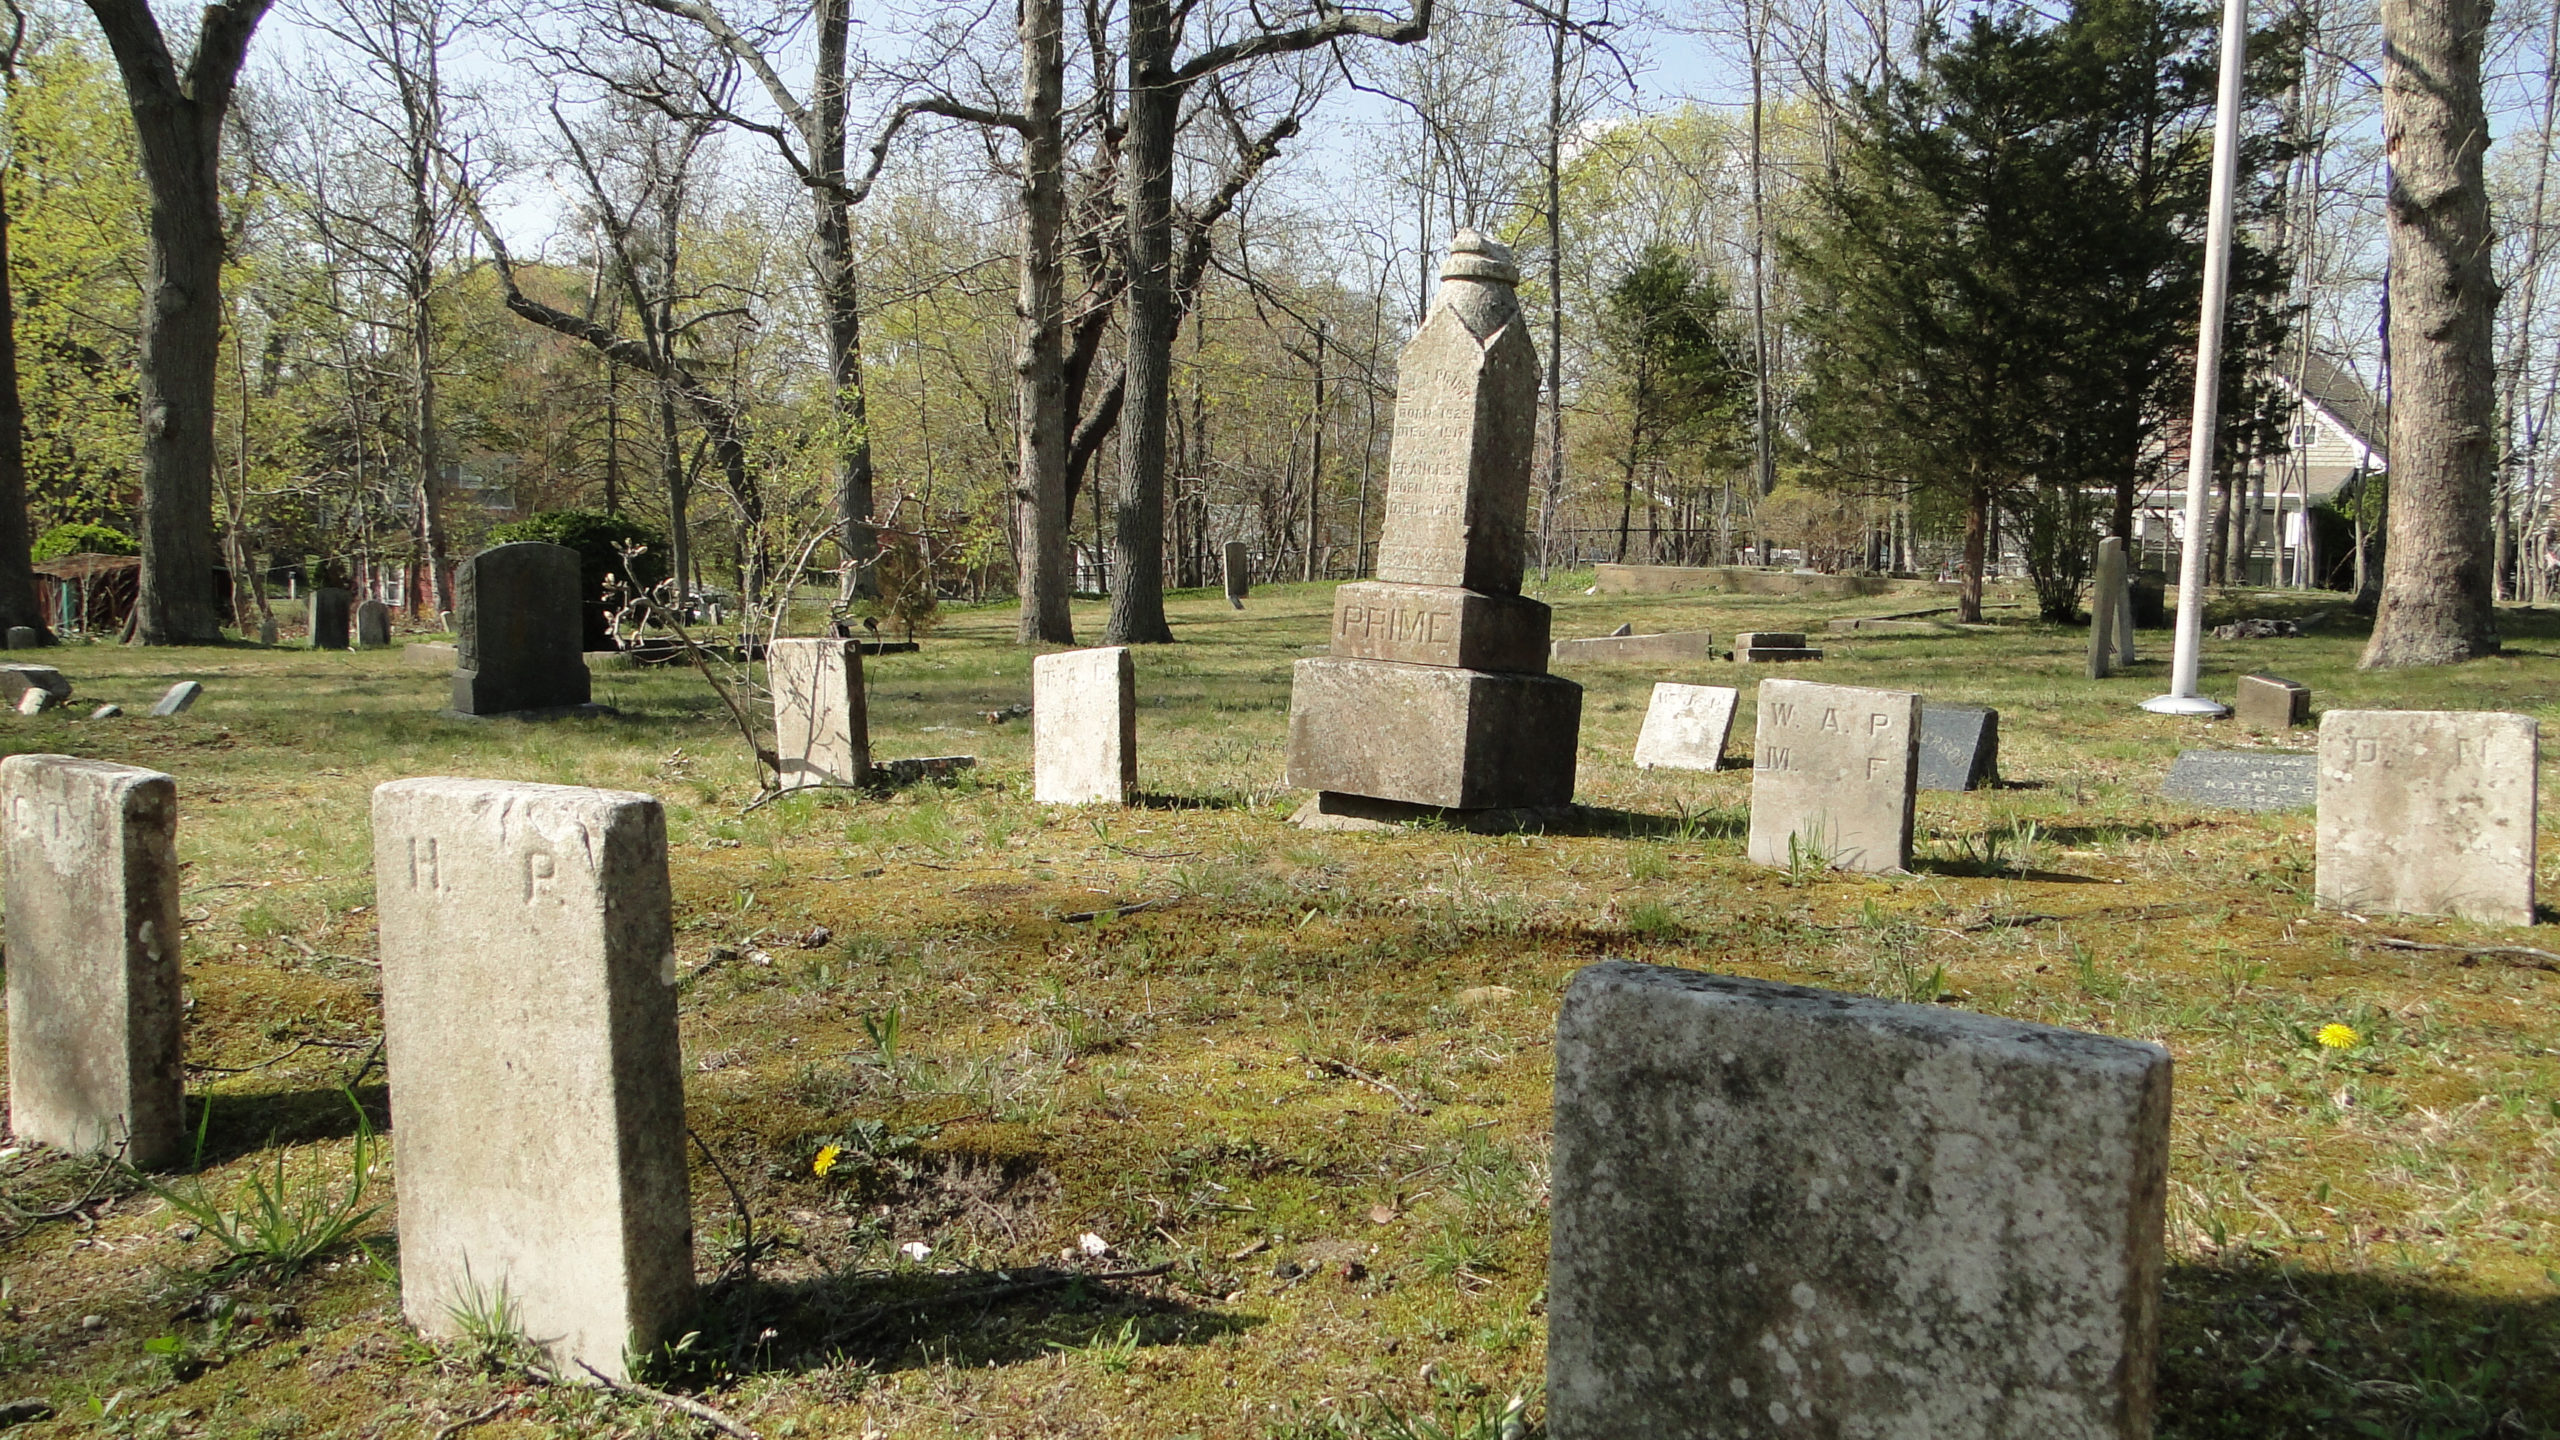 The Eastville Community Historical Society is organizing a cleanup of the African Methodist Episcopal Zion Cemetery on Eastville Avenue in Sag Harbor